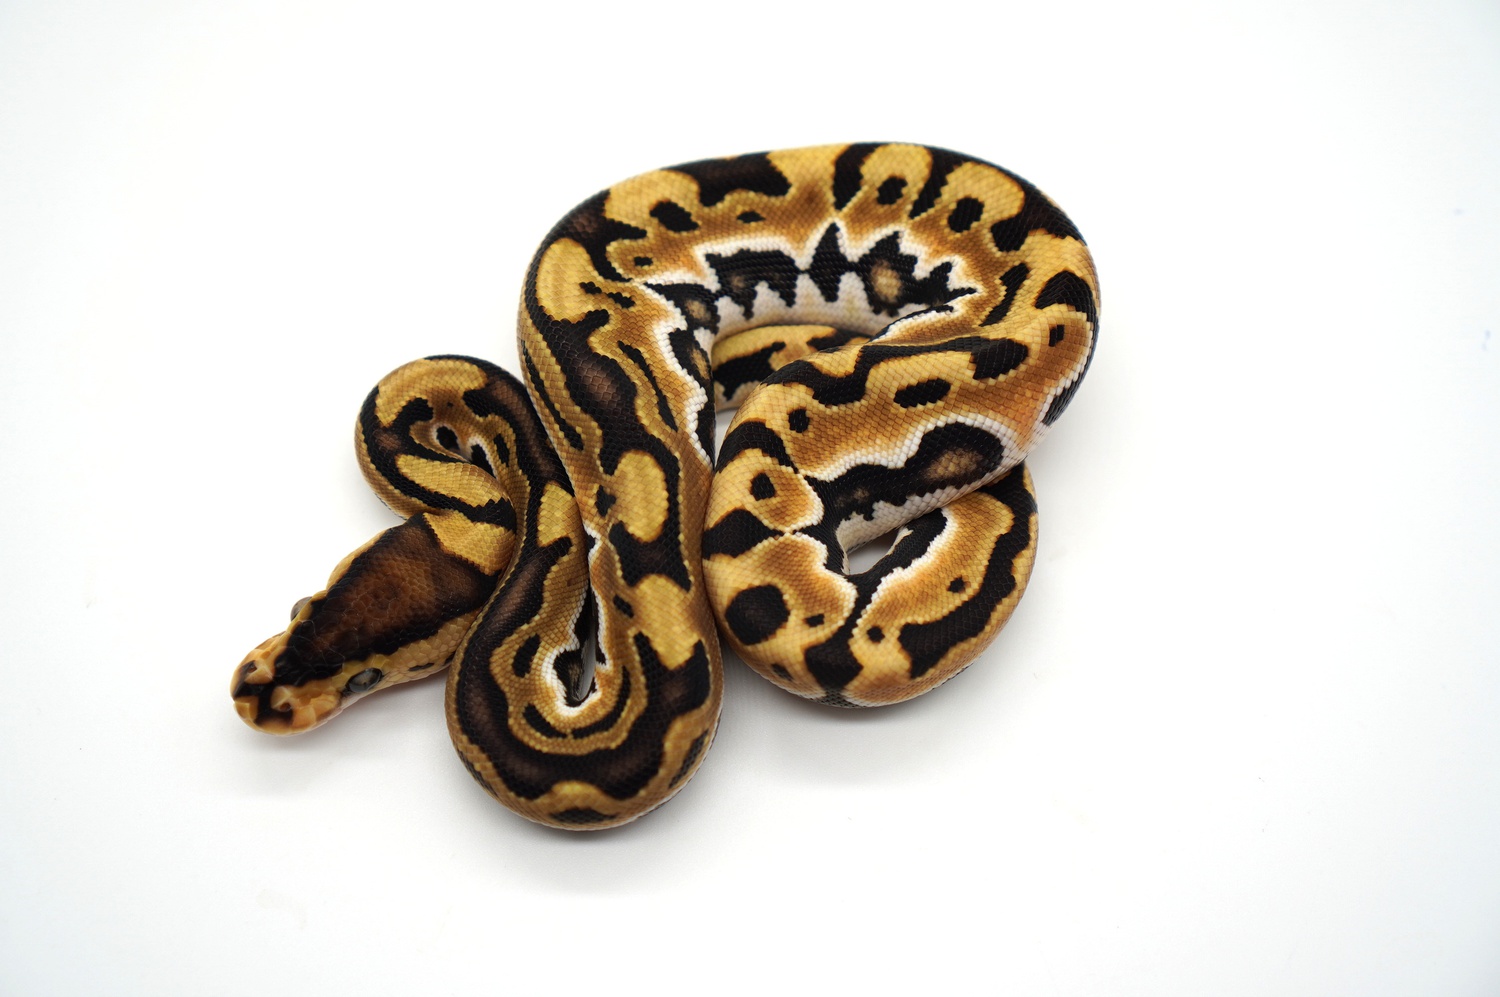 Orange Dream Het Red Axanthic Puzzle Ball Python by Ozzy Boids LLC